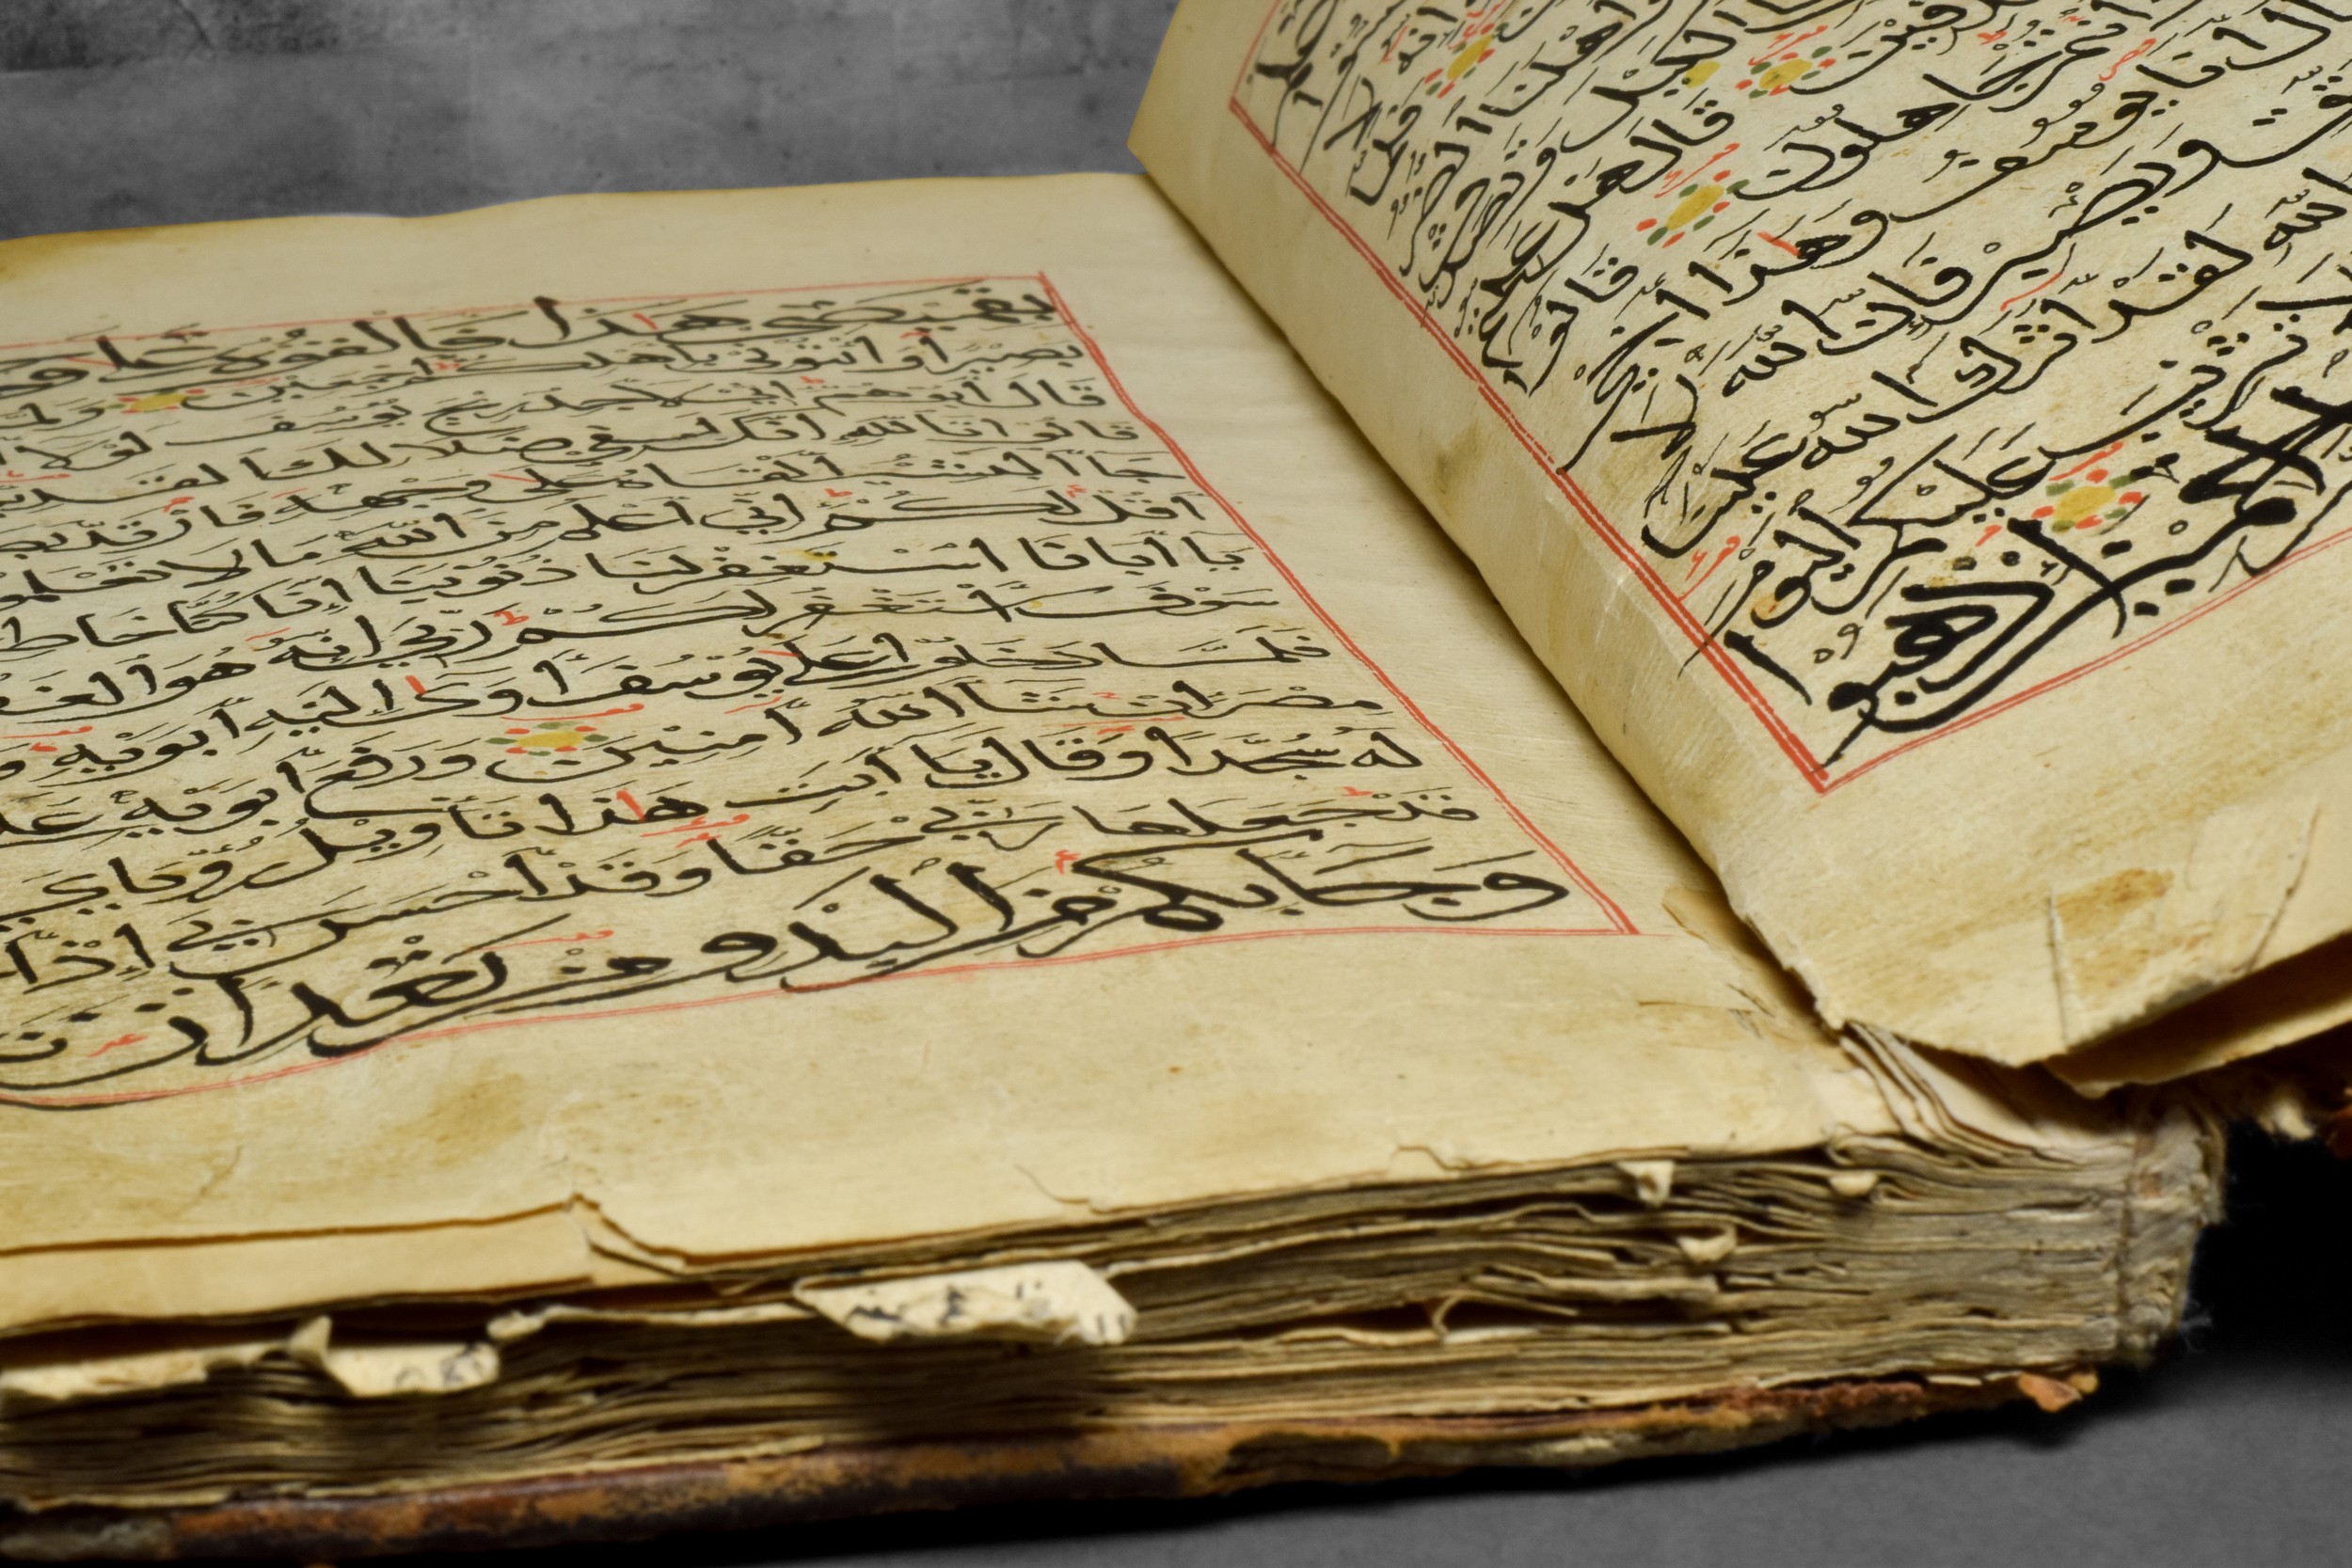 MULTIPLE SECTIONS OF AN 18TH CENTURY QURAN - Image 3 of 4